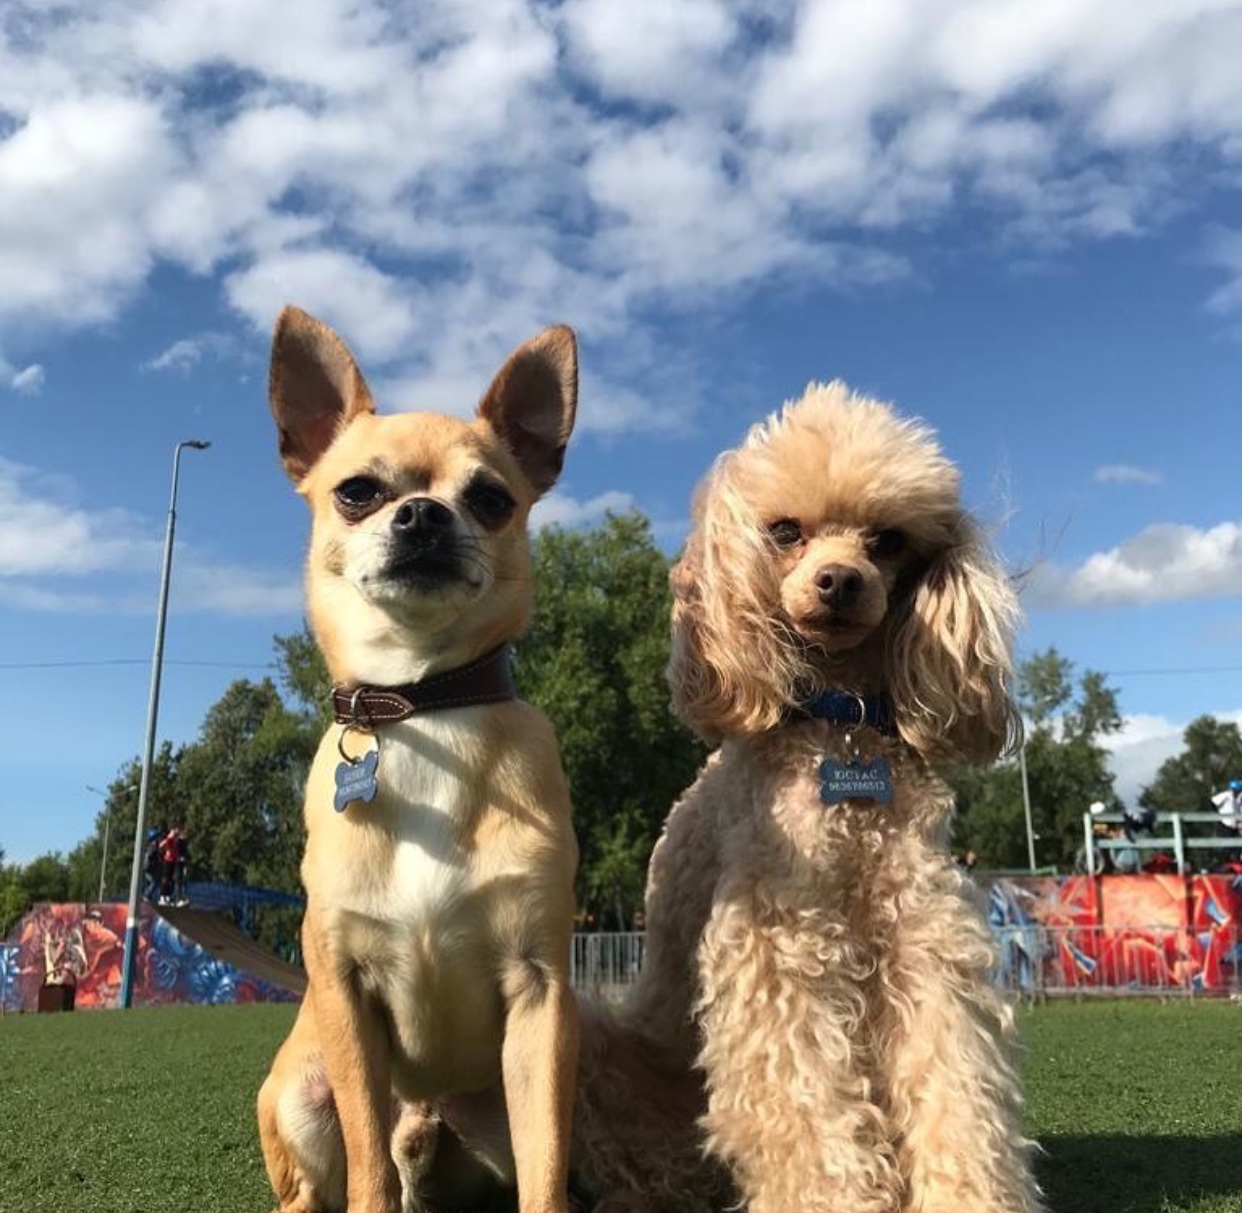 A Poodle sitting at the park next to a chihuahua